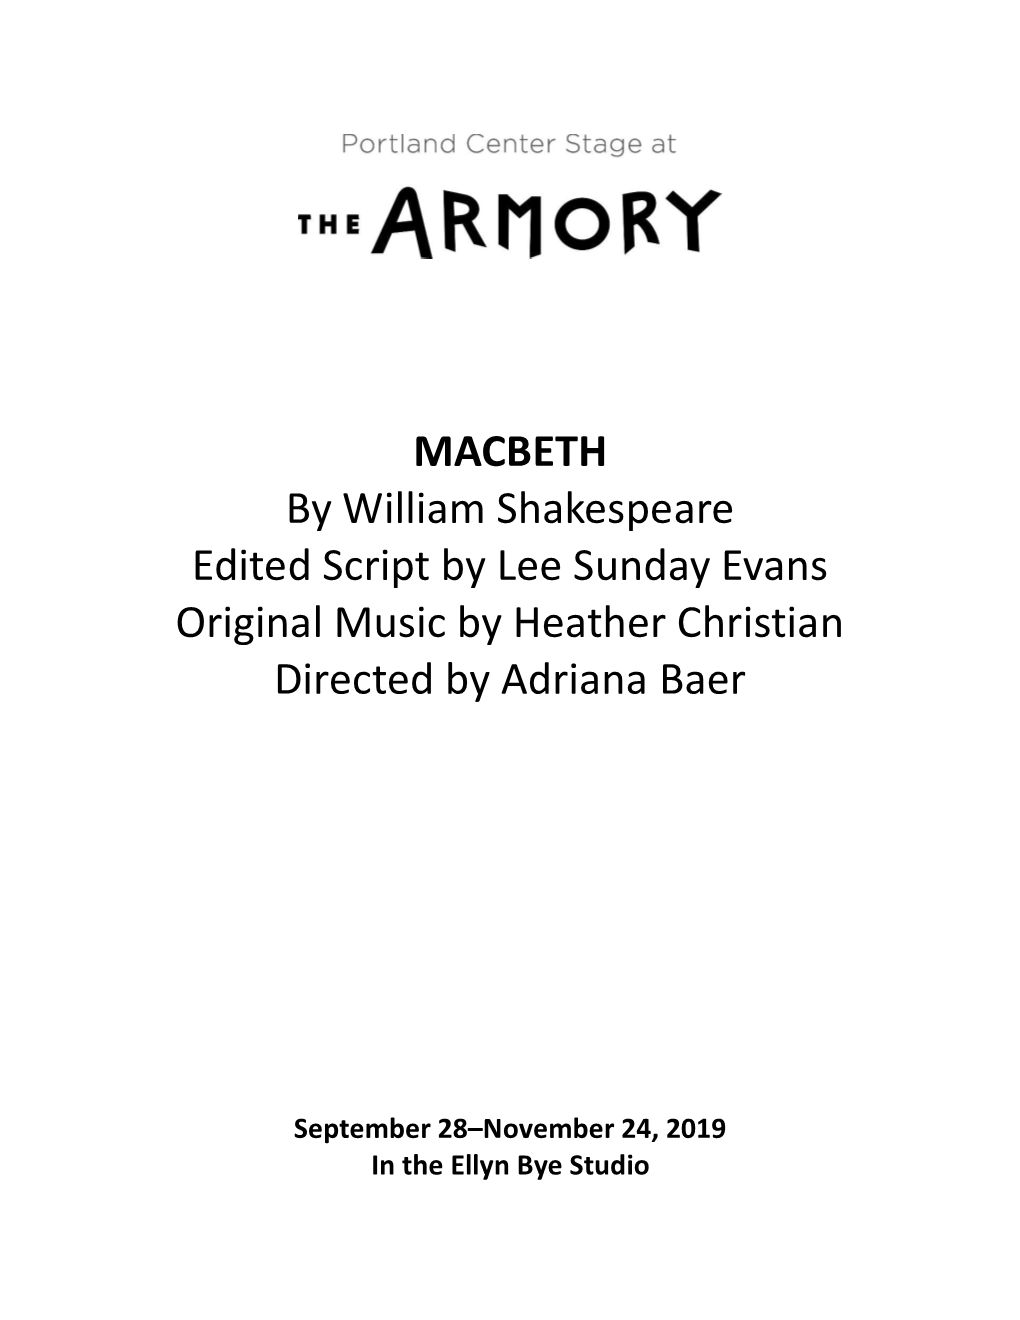 MACBETH by William Shakespeare Edited Script by Lee Sunday Evans Original Music by Heather Christian Directed by Adriana Baer